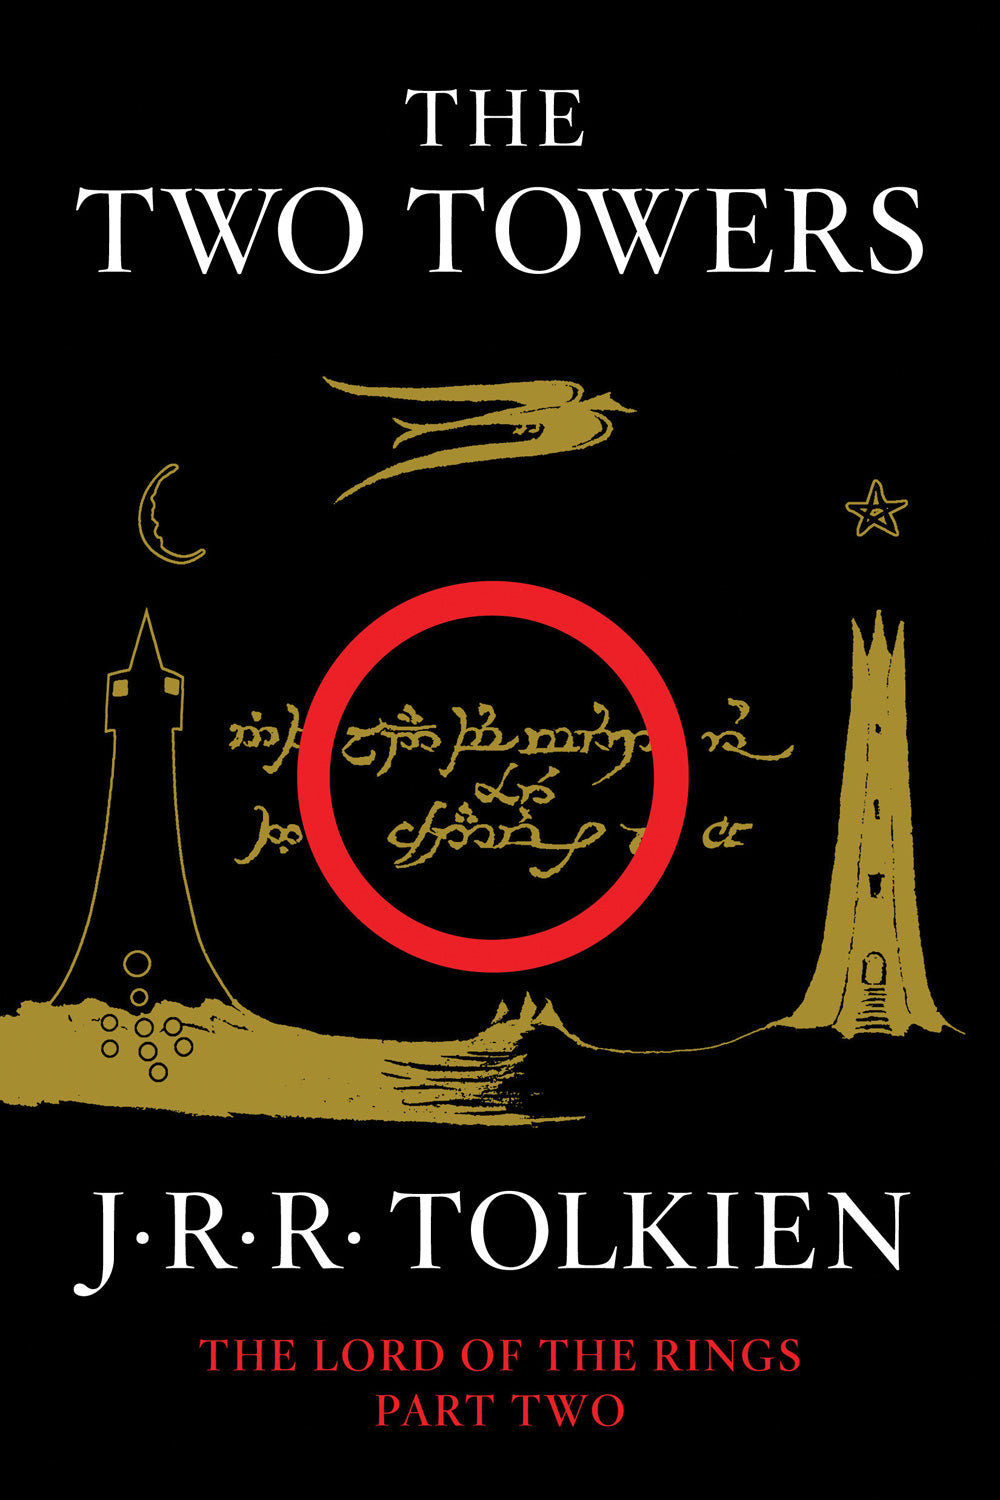 The Two Towers by J.R.R. Tolkien - tpbk